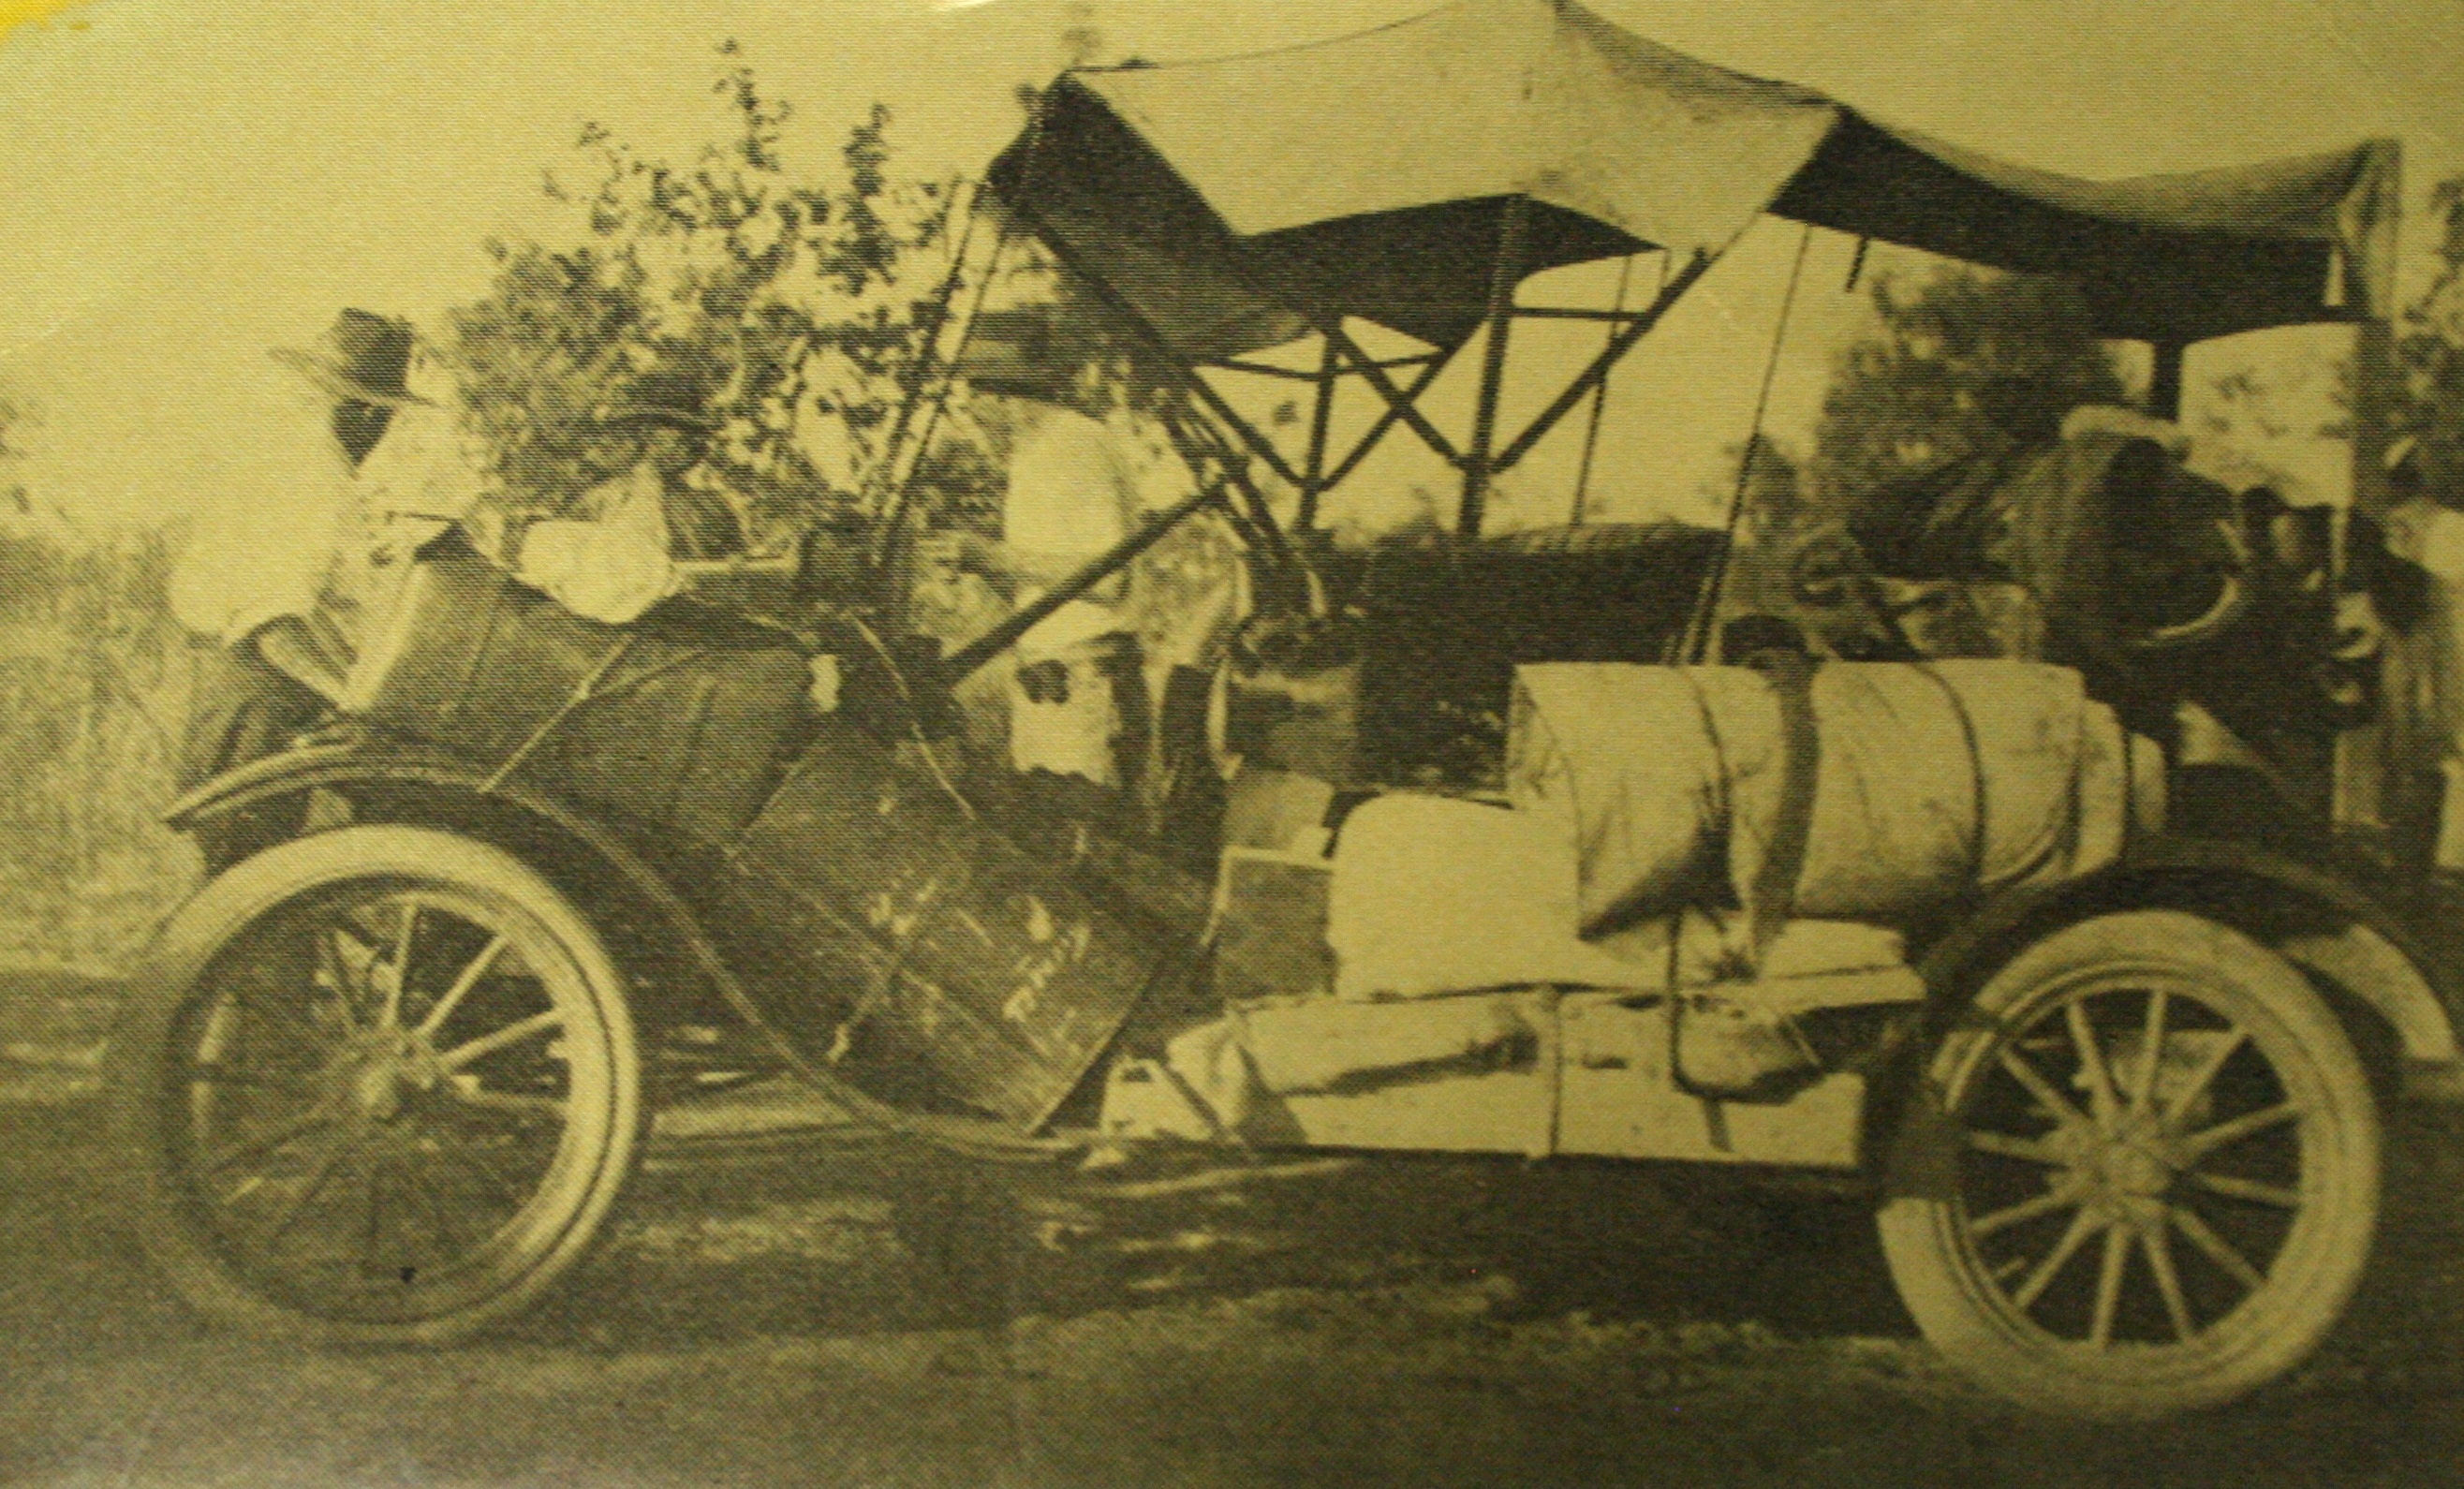 Photograph of the modified Model T Ford loaded with fuel and supplies.